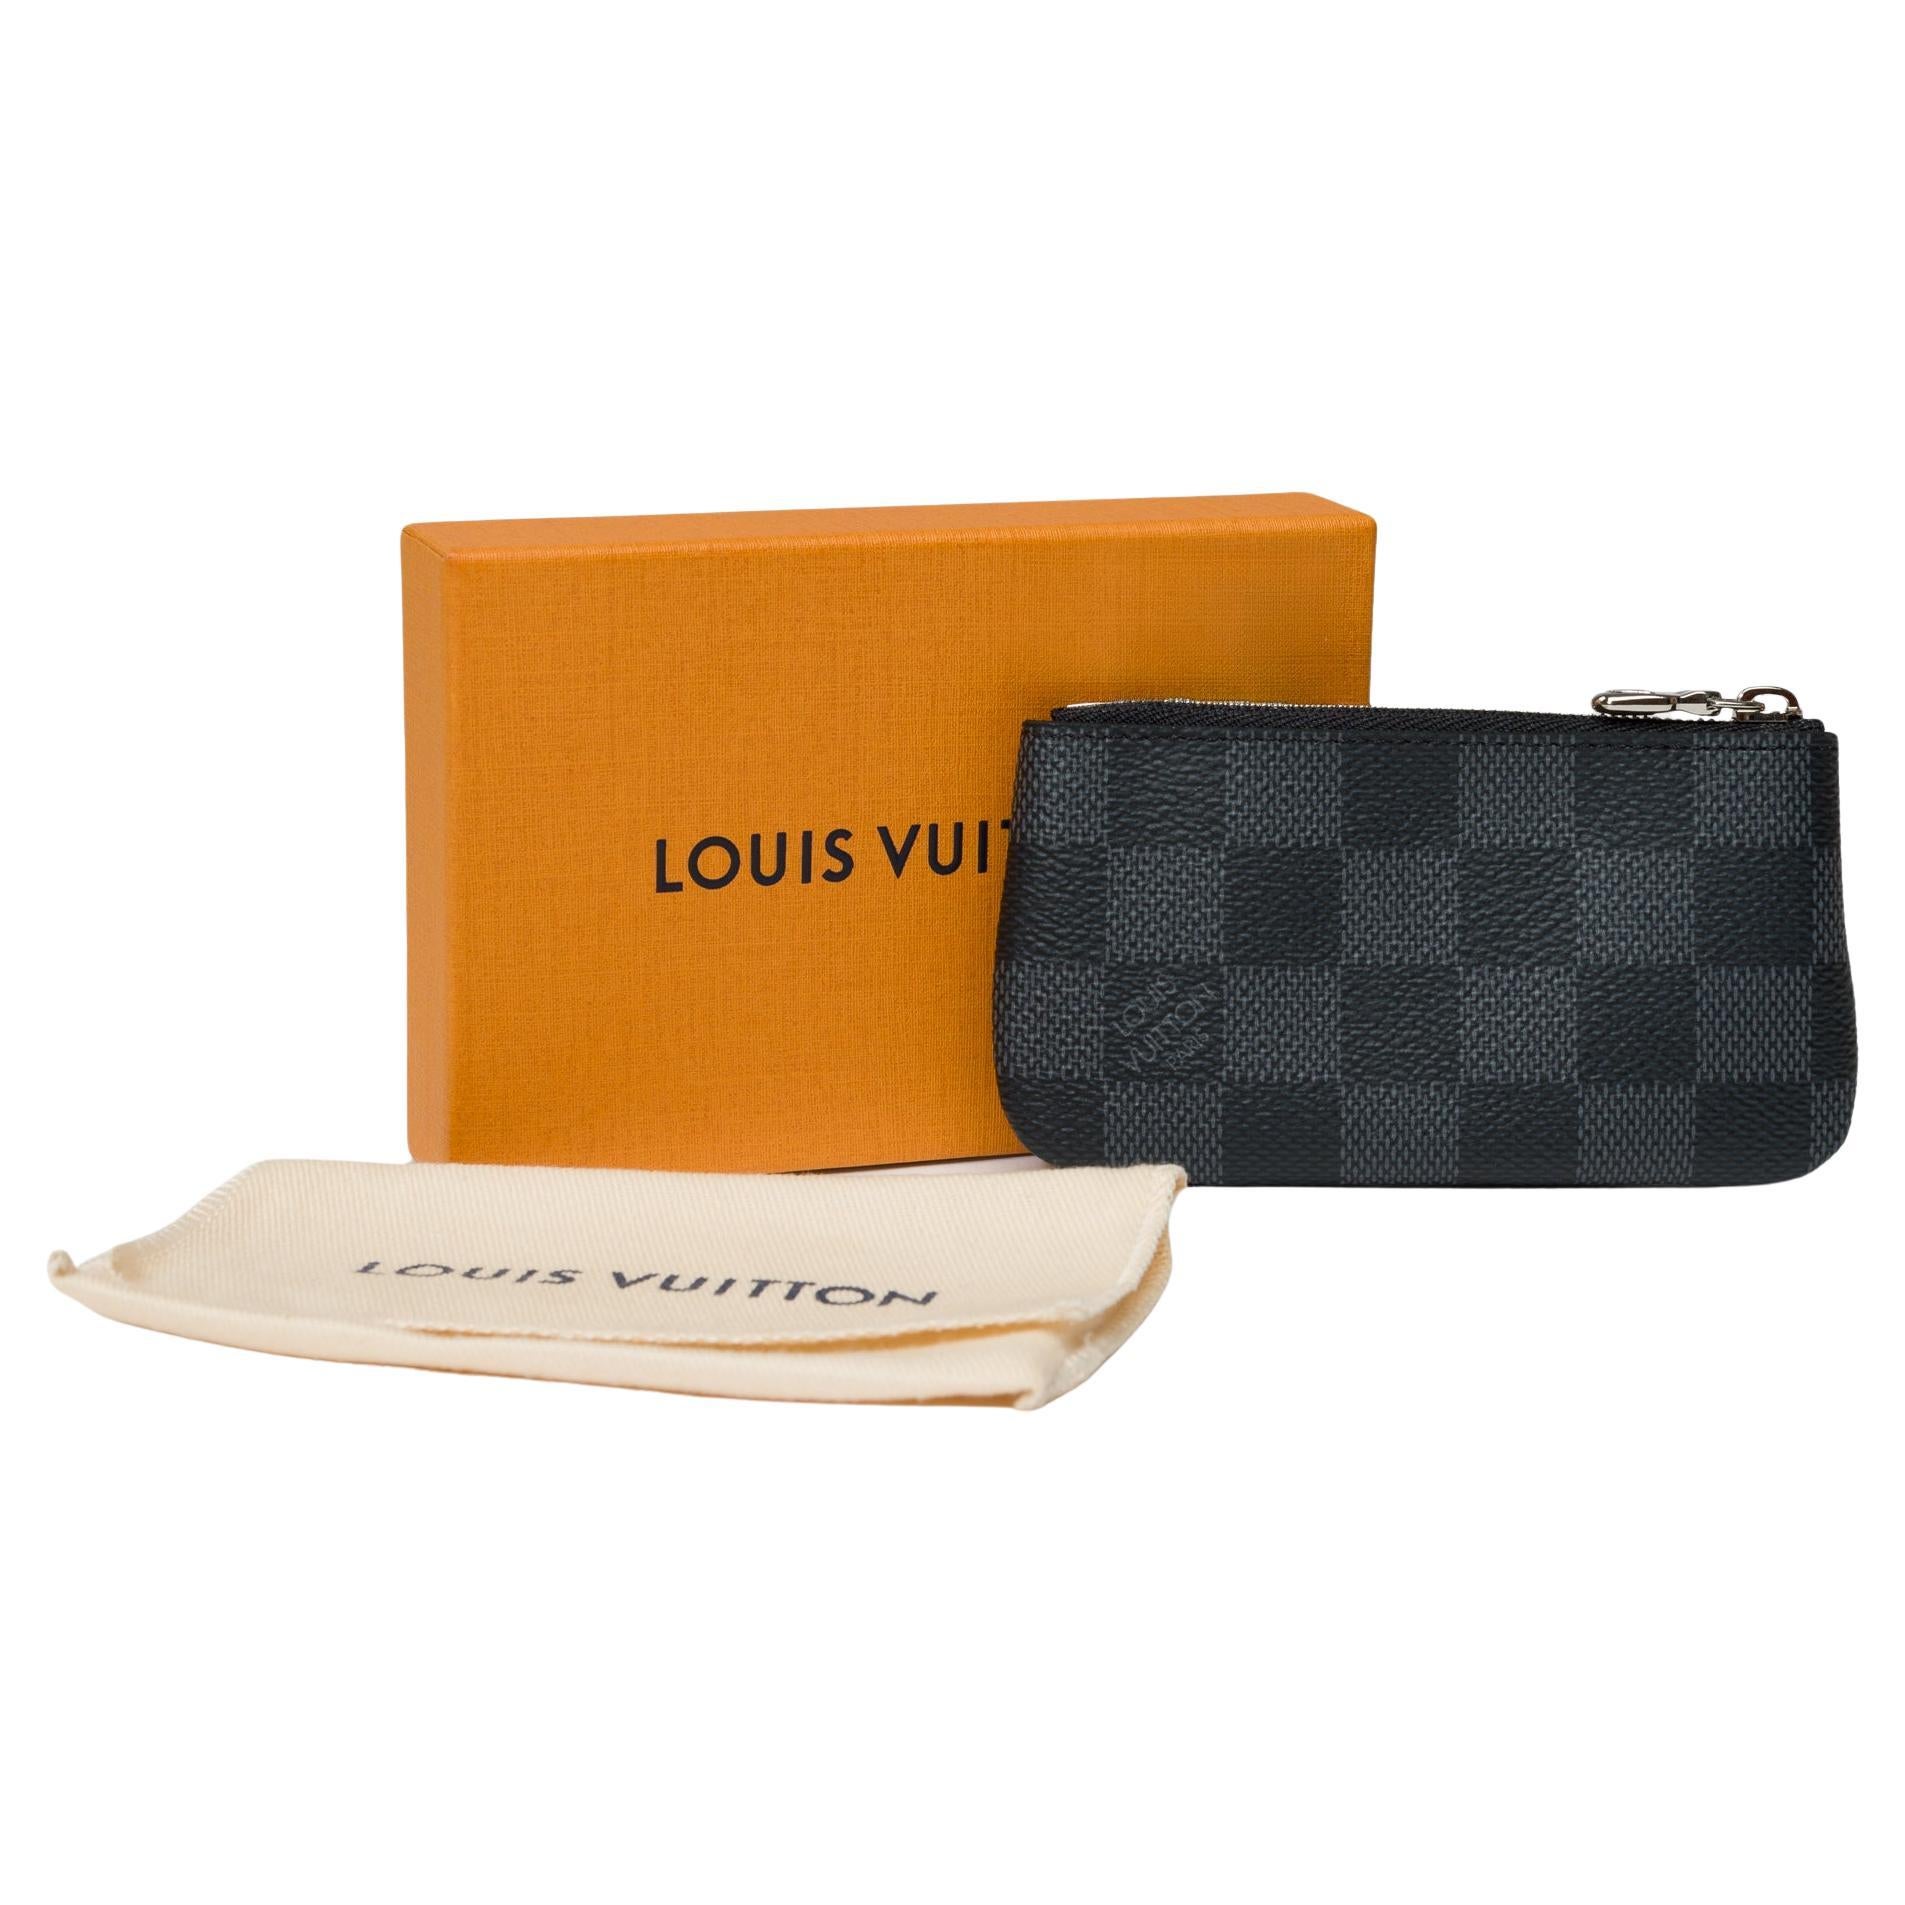 New Louis Vuitton Key Pouch in graphite damier canvas, SHW For Sale